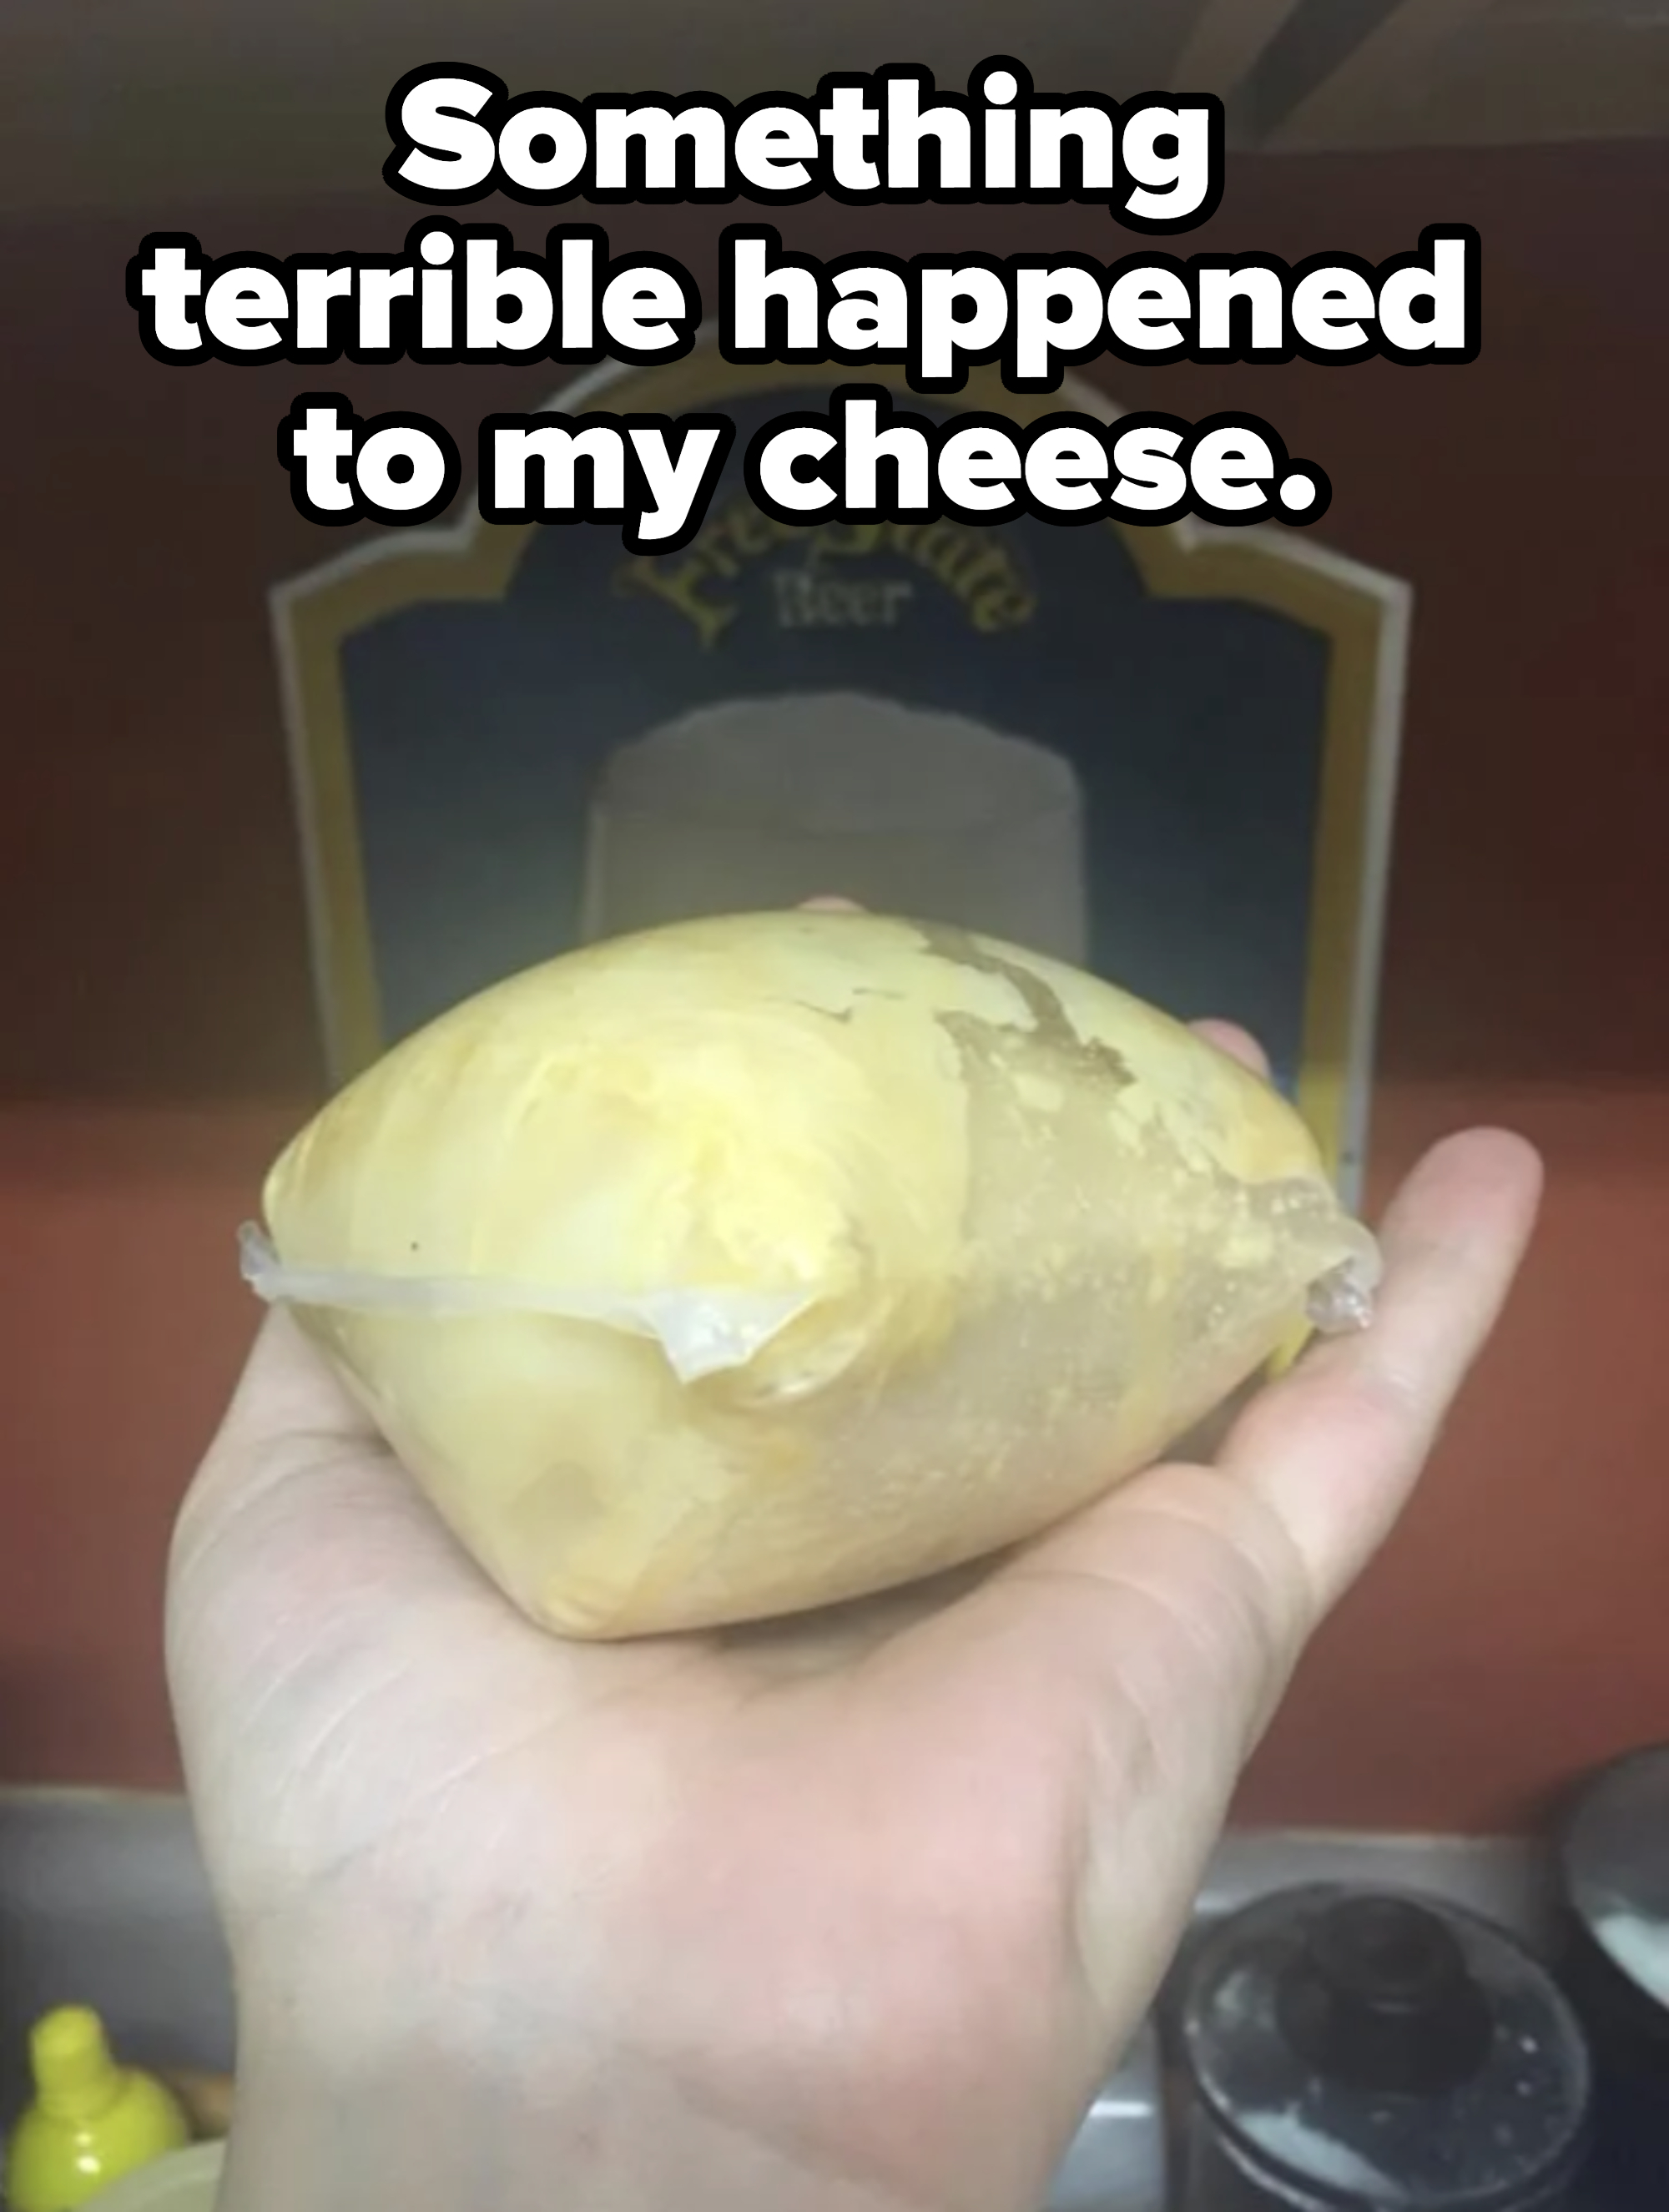 A hand holding a bloated package of cheese with caption &quot;Something terrible happened to my cheese&quot;